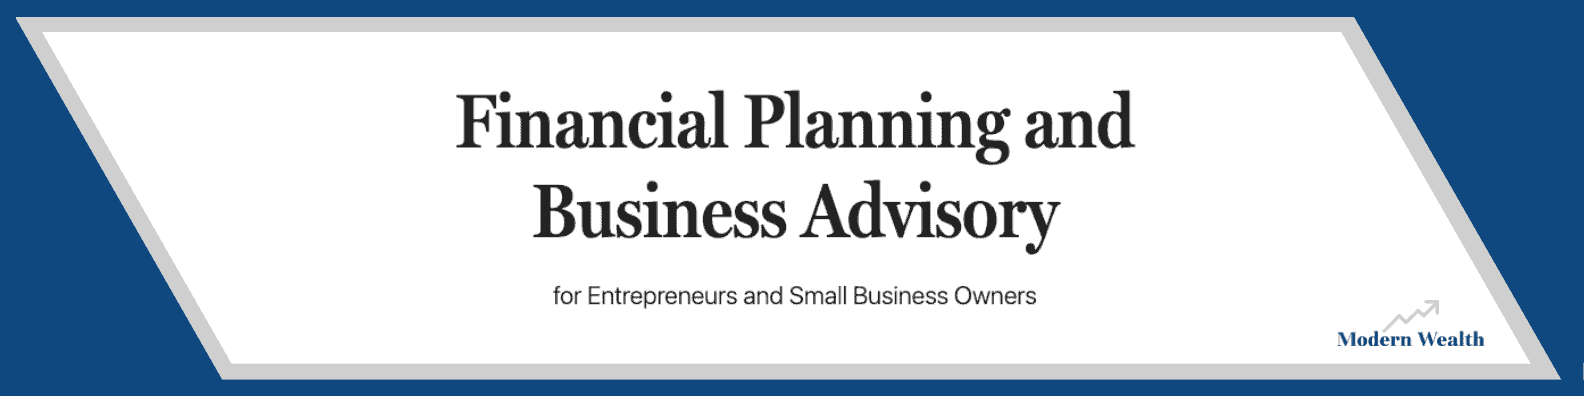 Expert financial planning and business advisory services tailored for entrepreneurs and small business owners - building modern wealth.